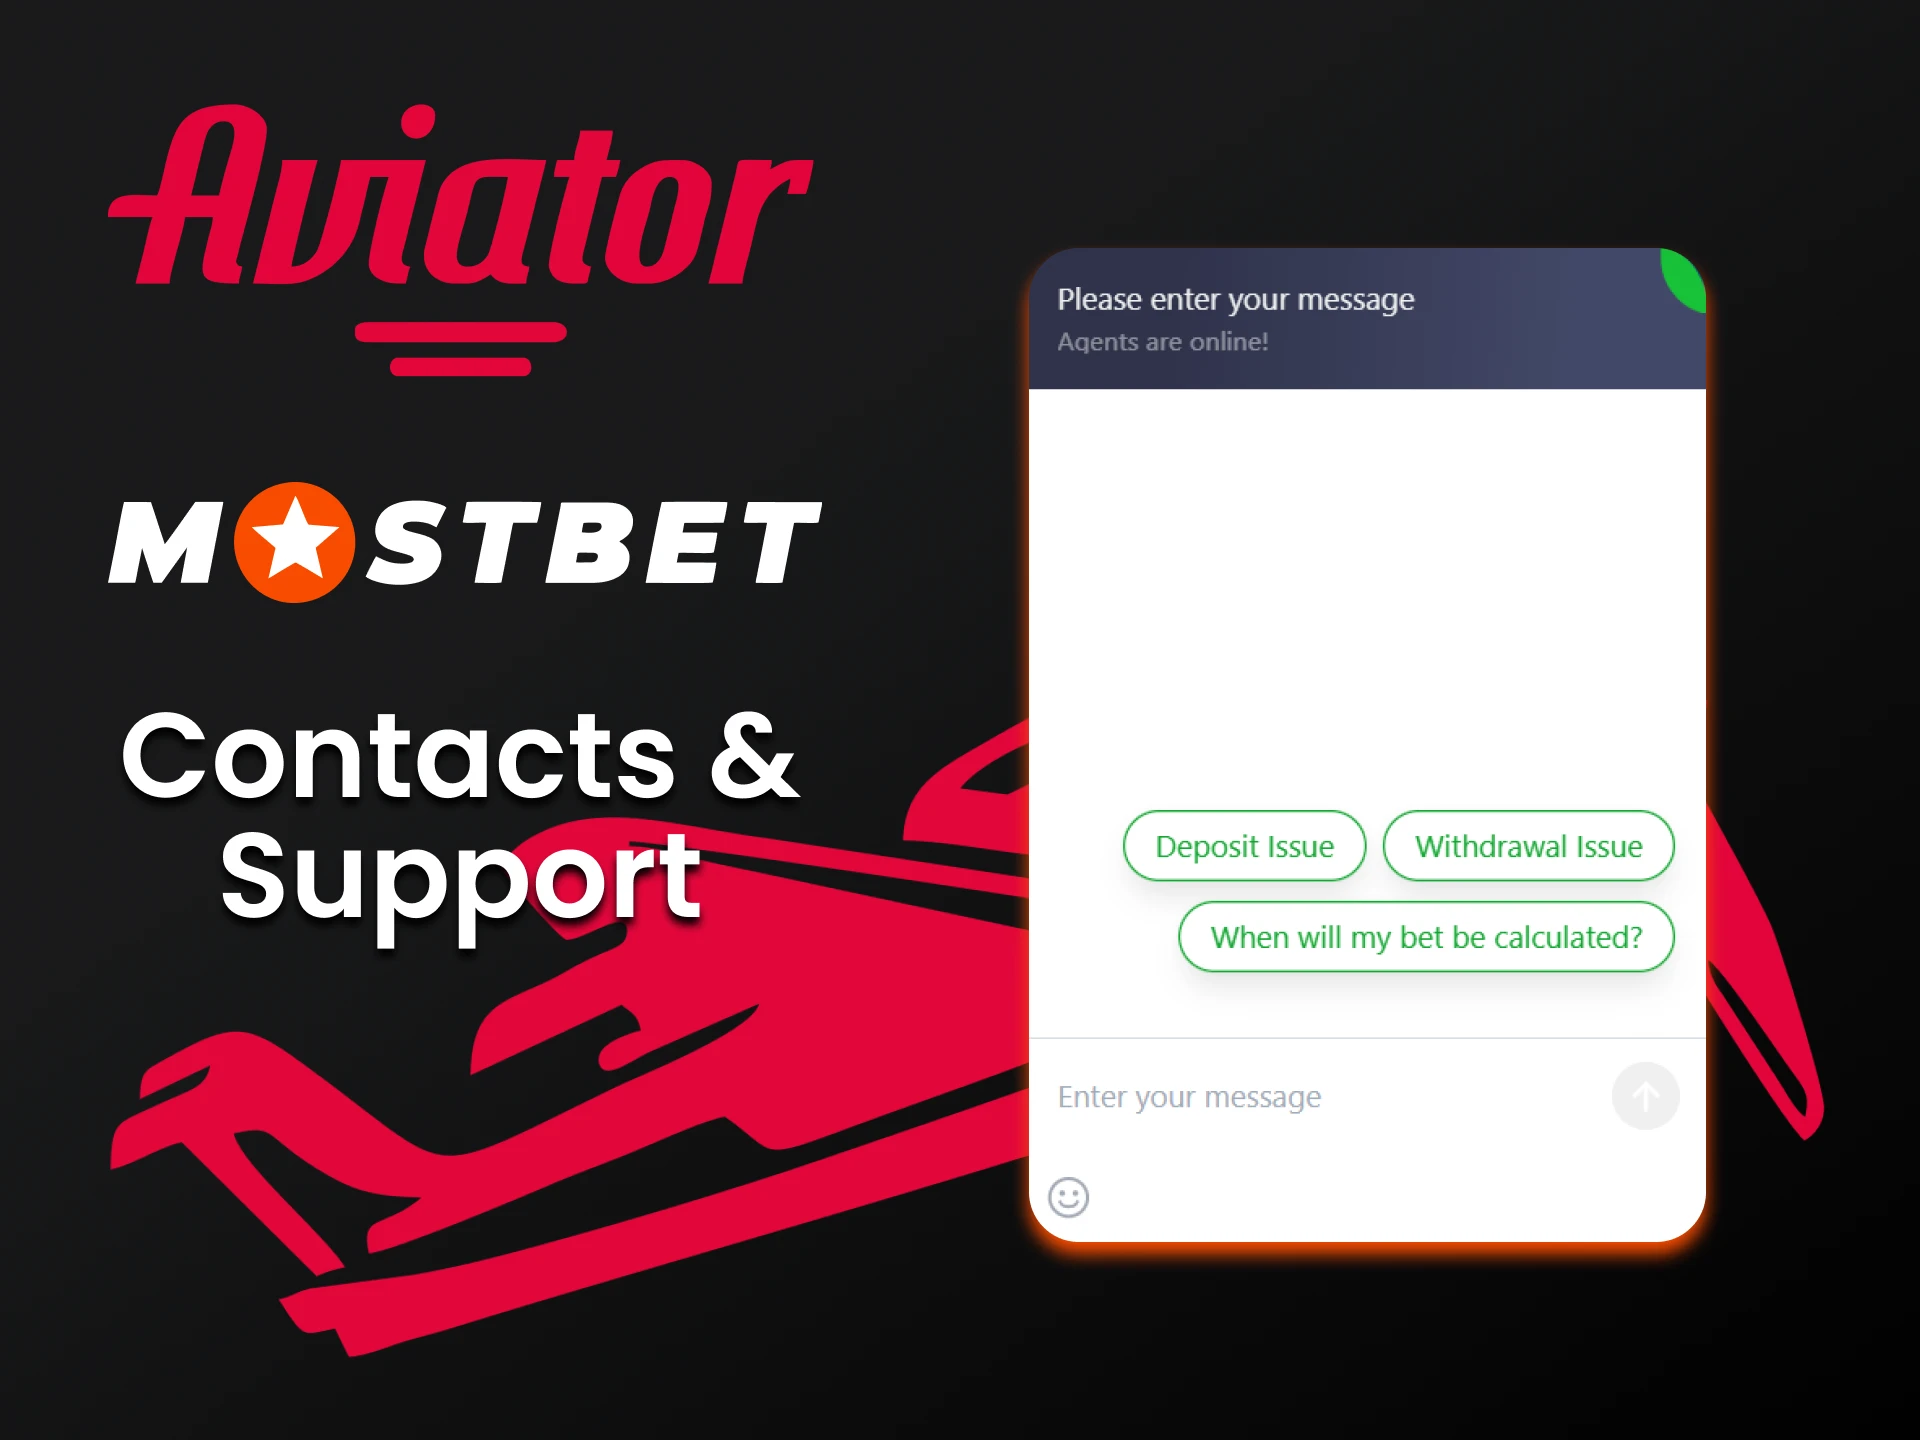 If you have any questions, you can contact Mostbet support.